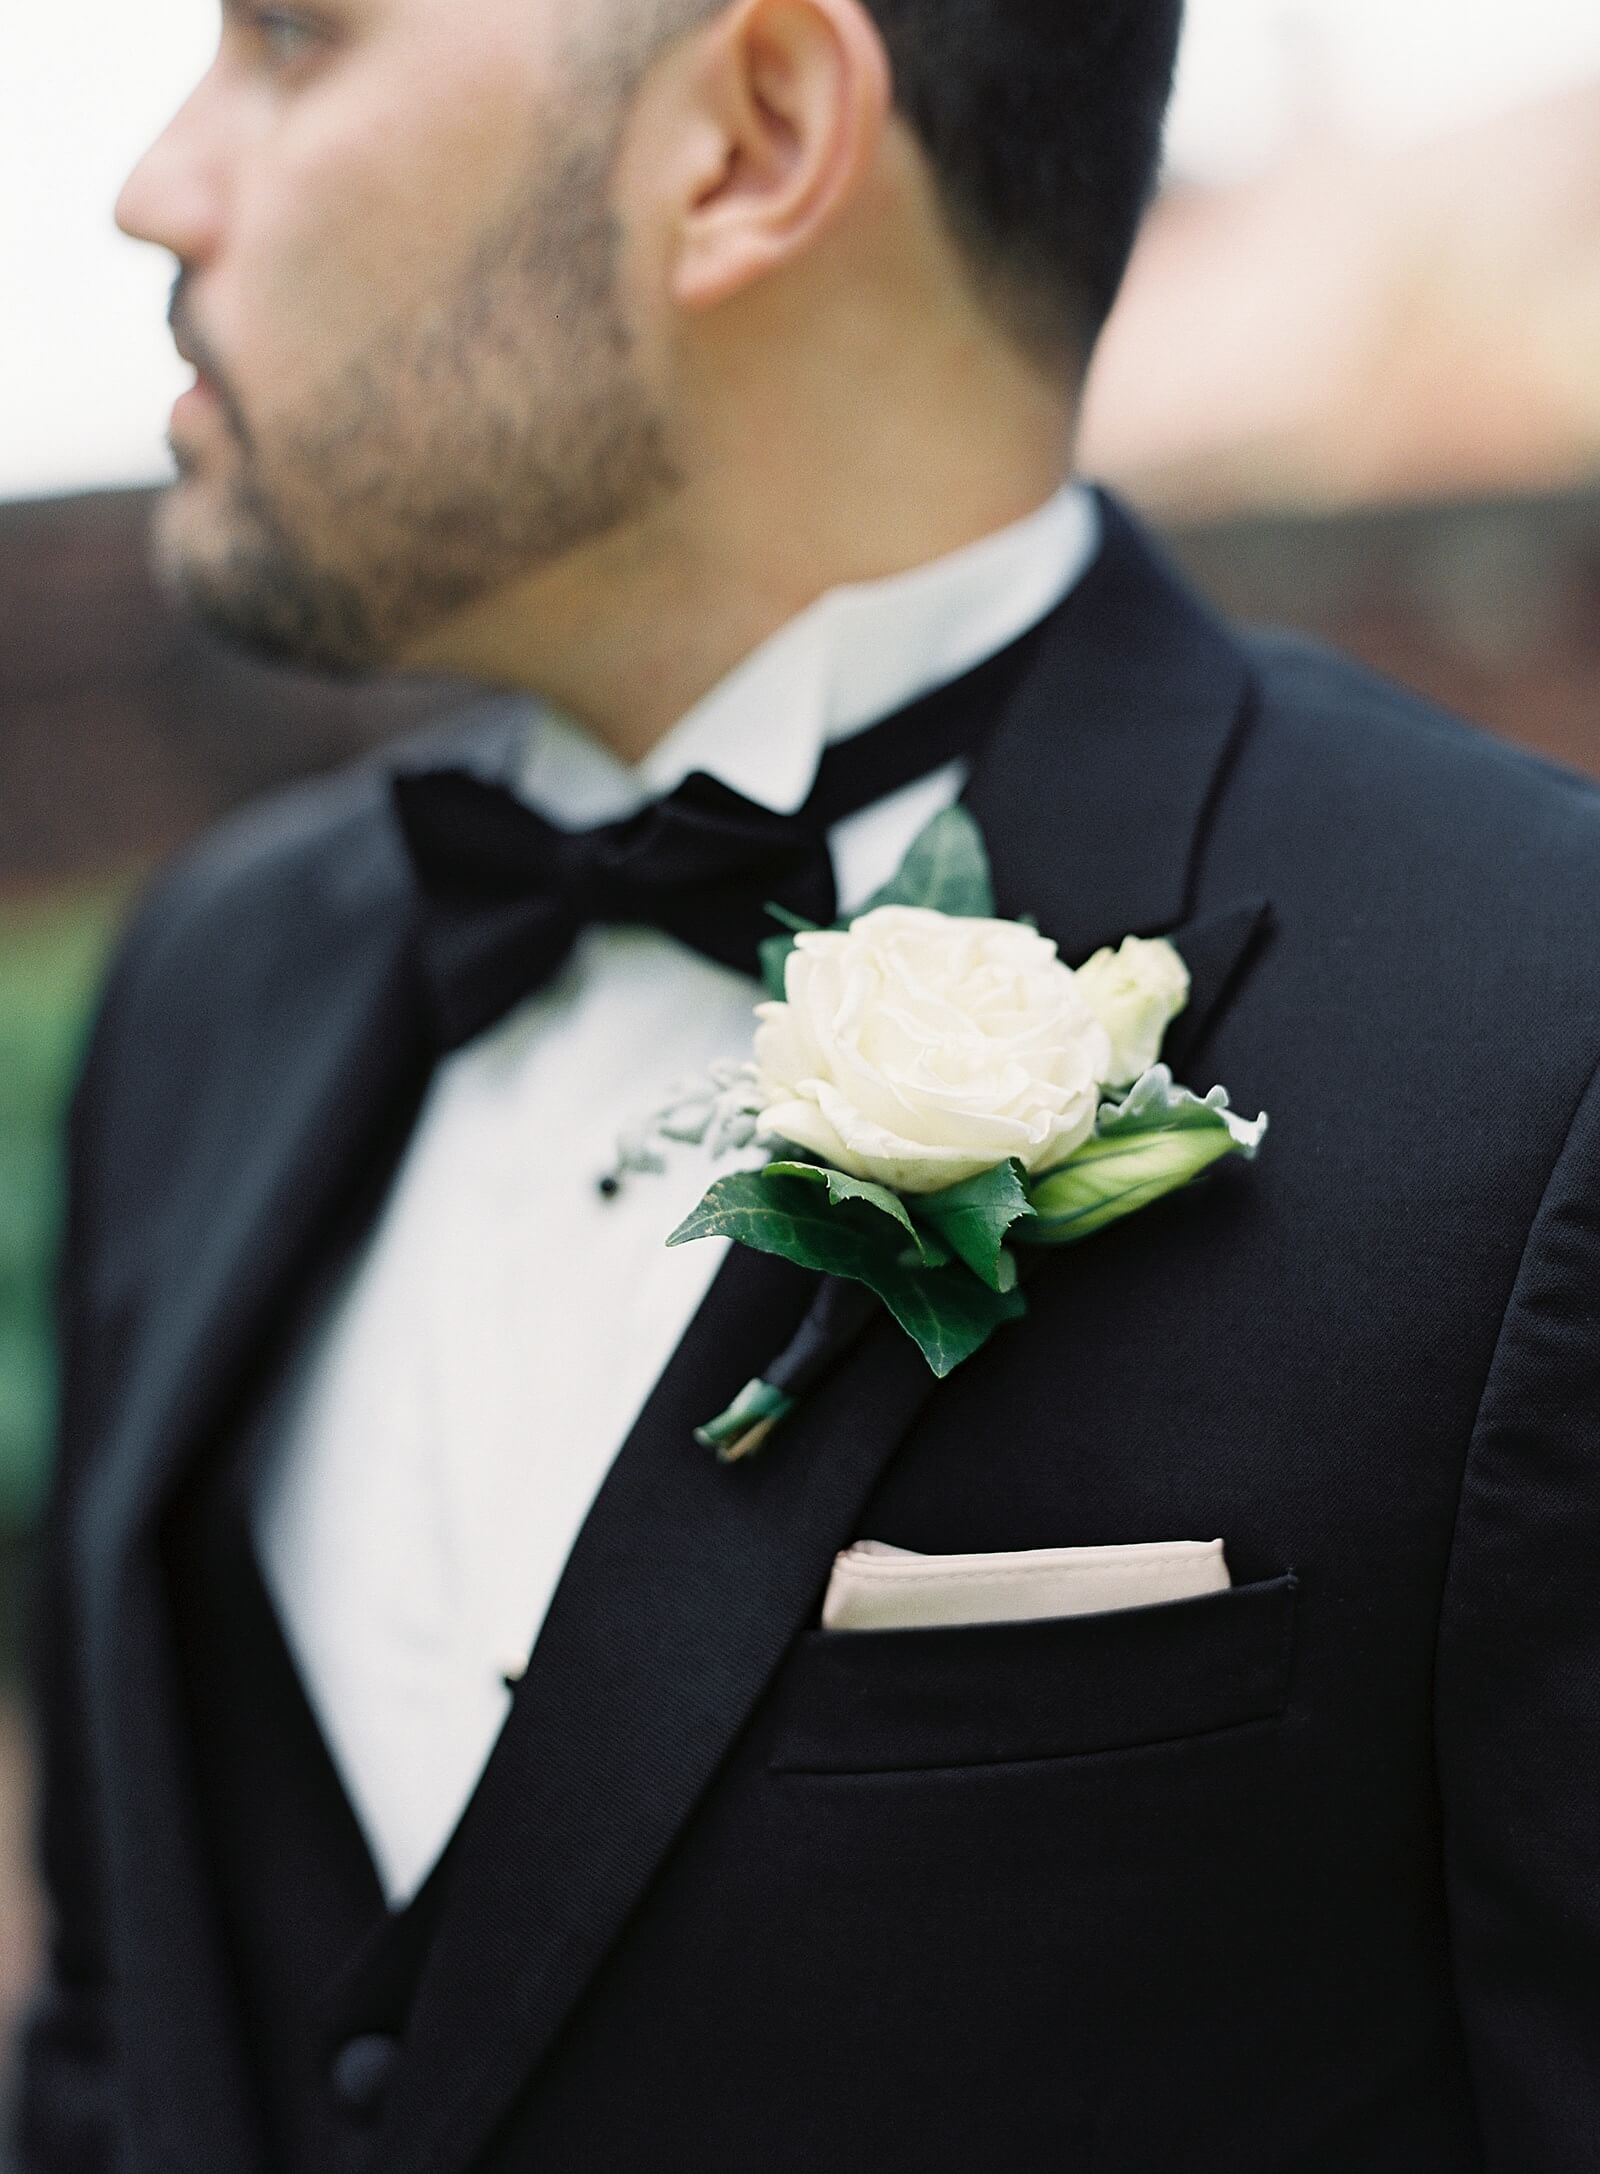 White rose boutonniere on groom in black tux - Jacqueline Benét Photography 